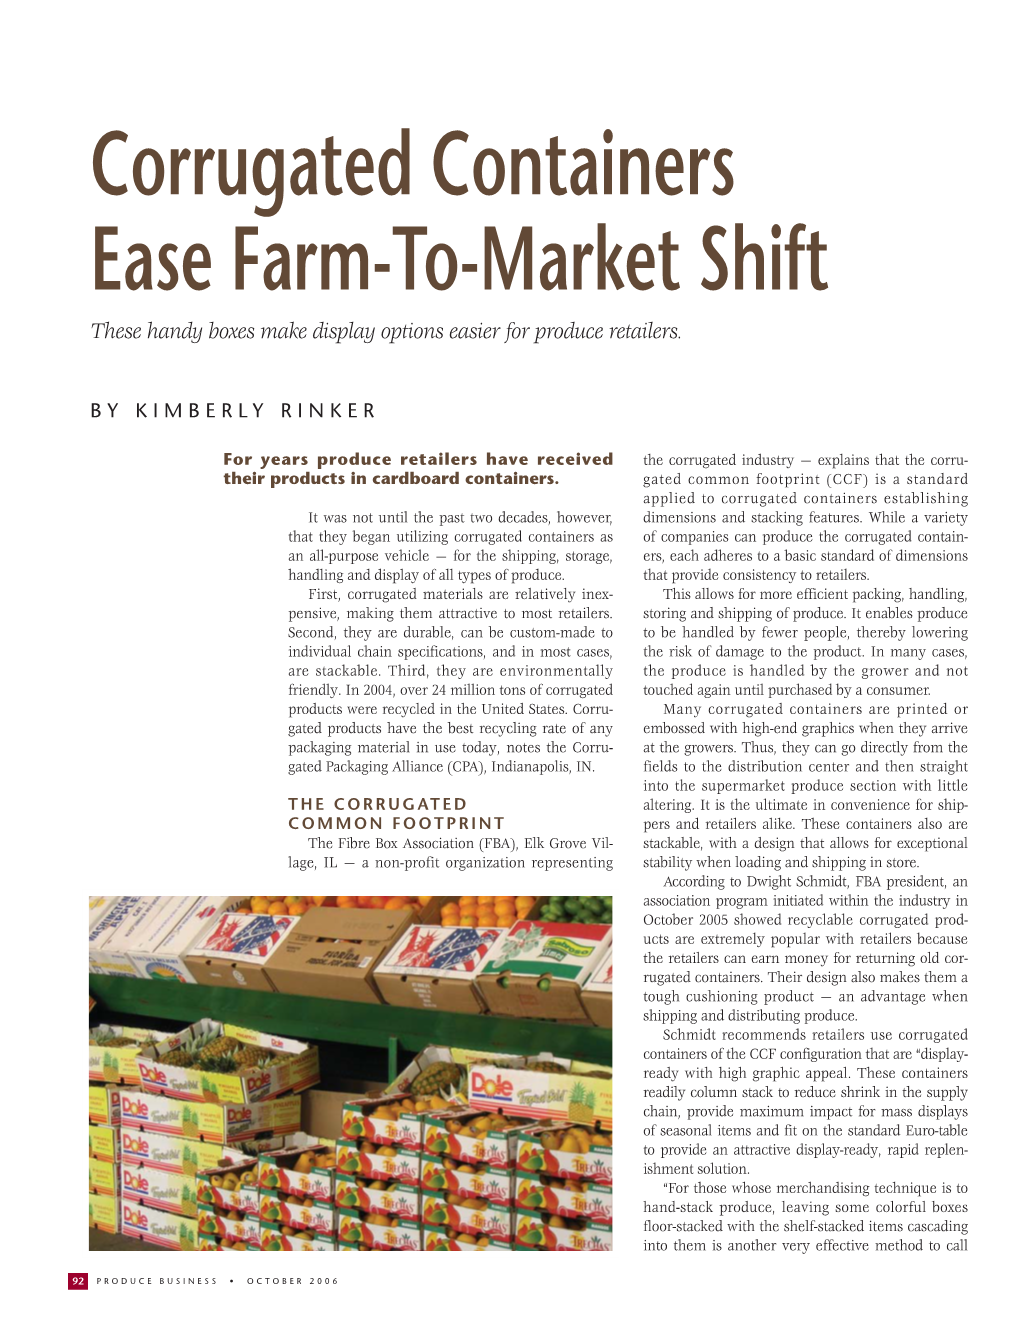 Corrugated Containers Ease Farm-To-Market Shift These Handy Boxes Make Display Options Easier for Produce Retailers